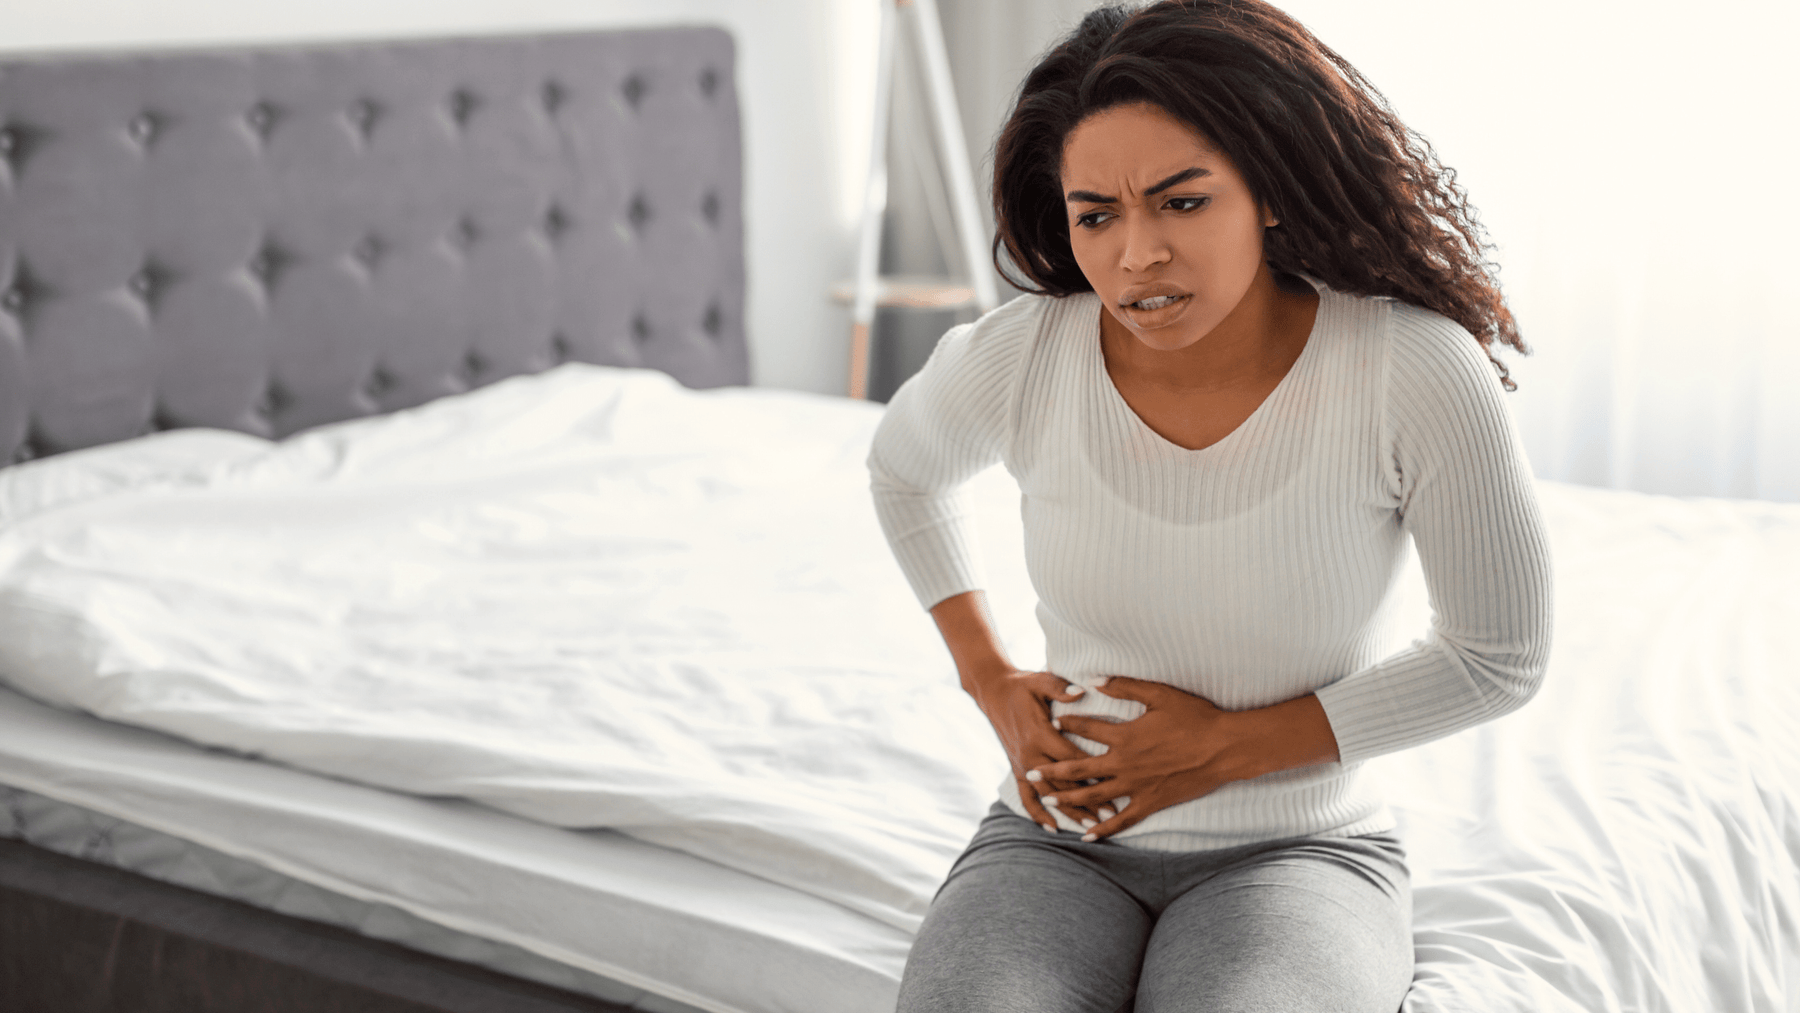 Symptoms and Treatment for UTI